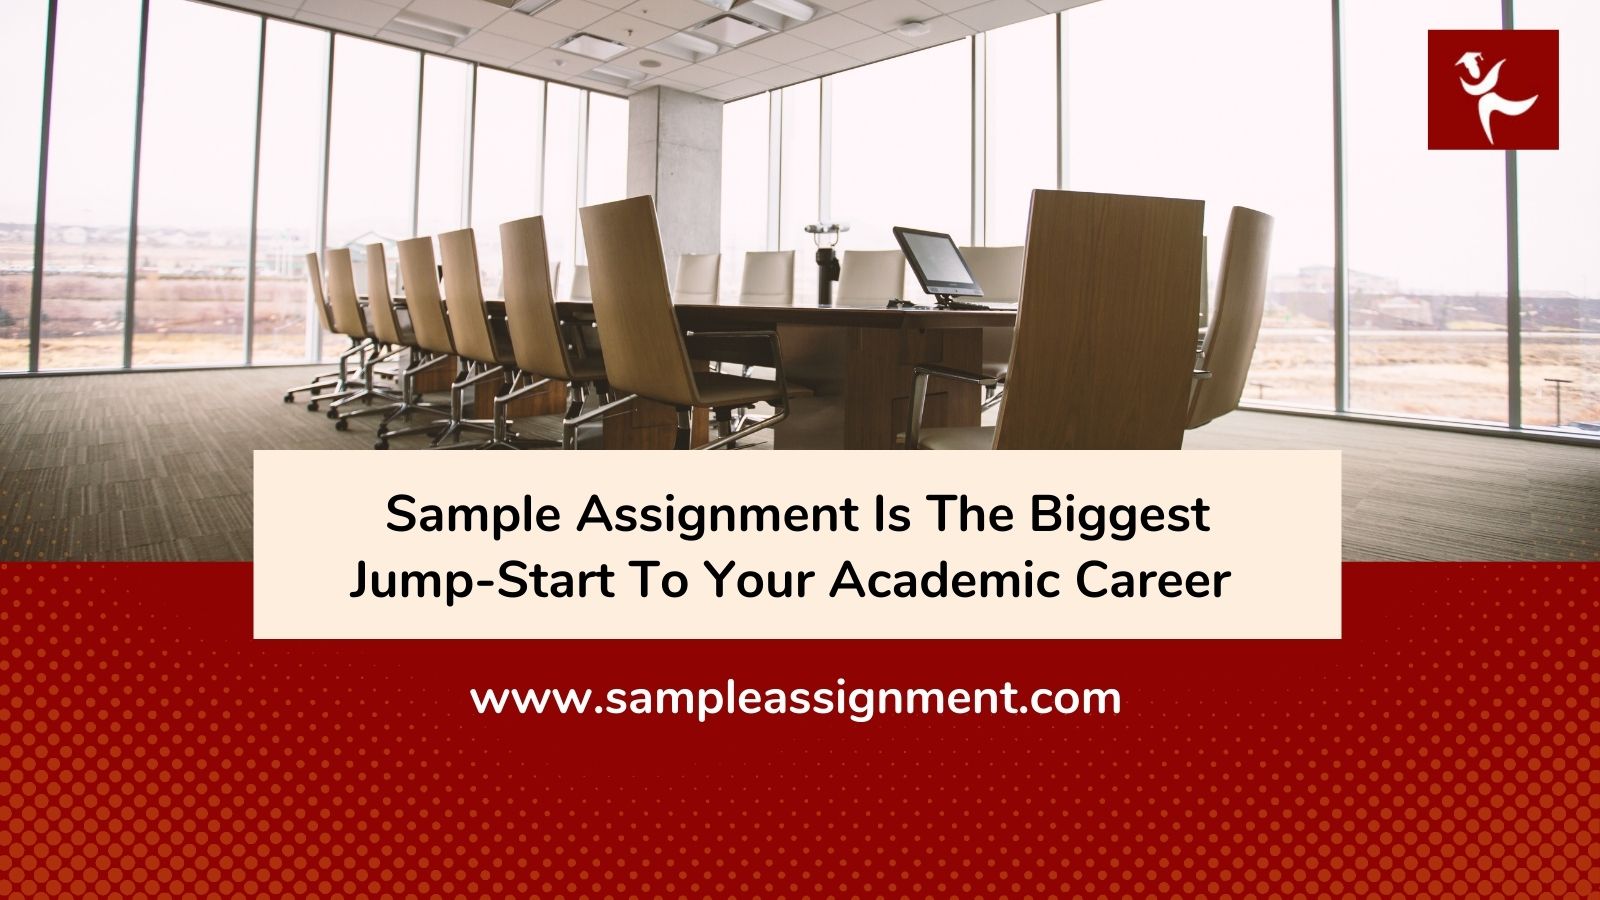 sample assignment company